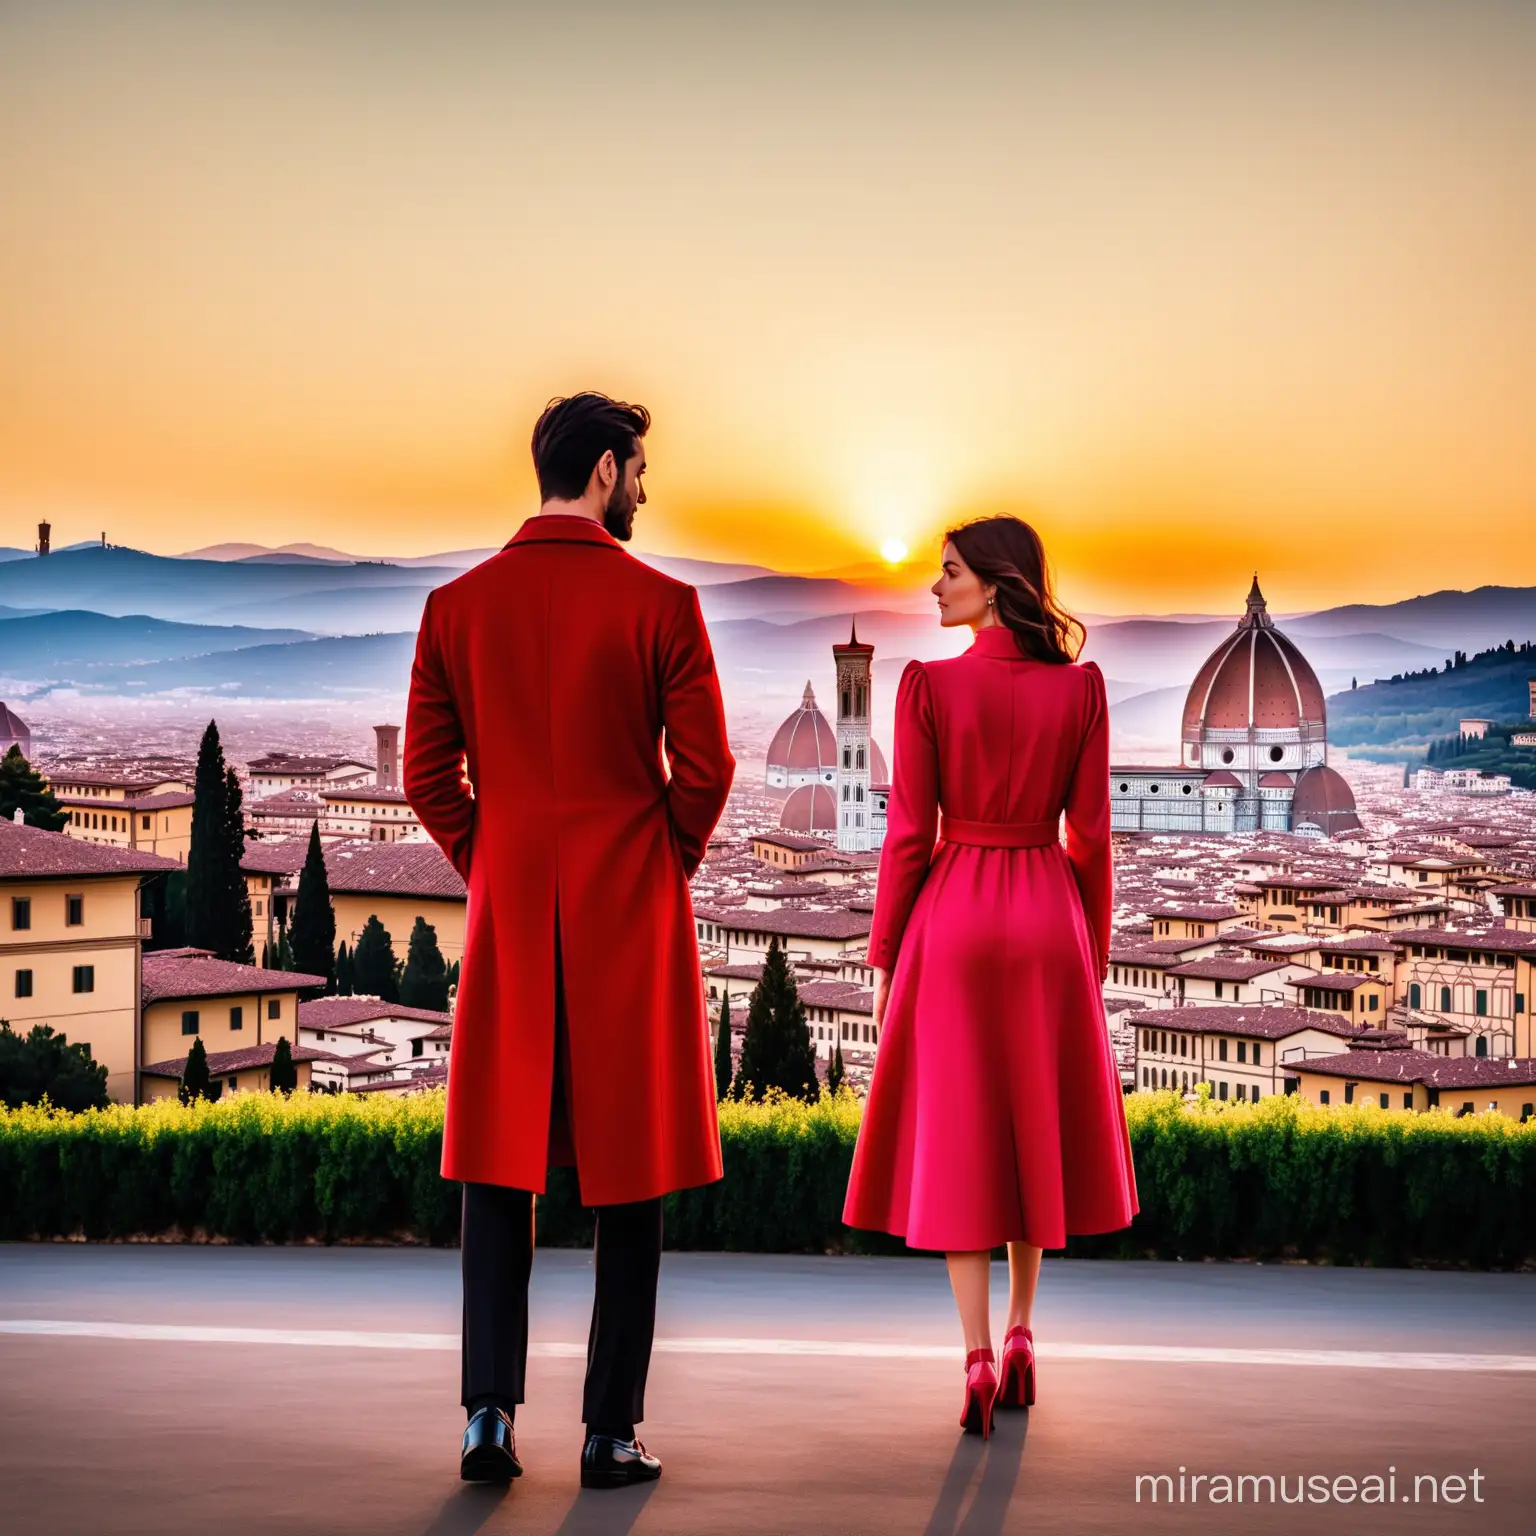 The background is a hill in Florence, Italy.

There is no one around, just a handsome man and a beautiful woman.

The two are watching the sunset.

The man is wearing a red coat and black pants.

The woman is wearing a pink dress and red shoes.

It's a romantic scene.